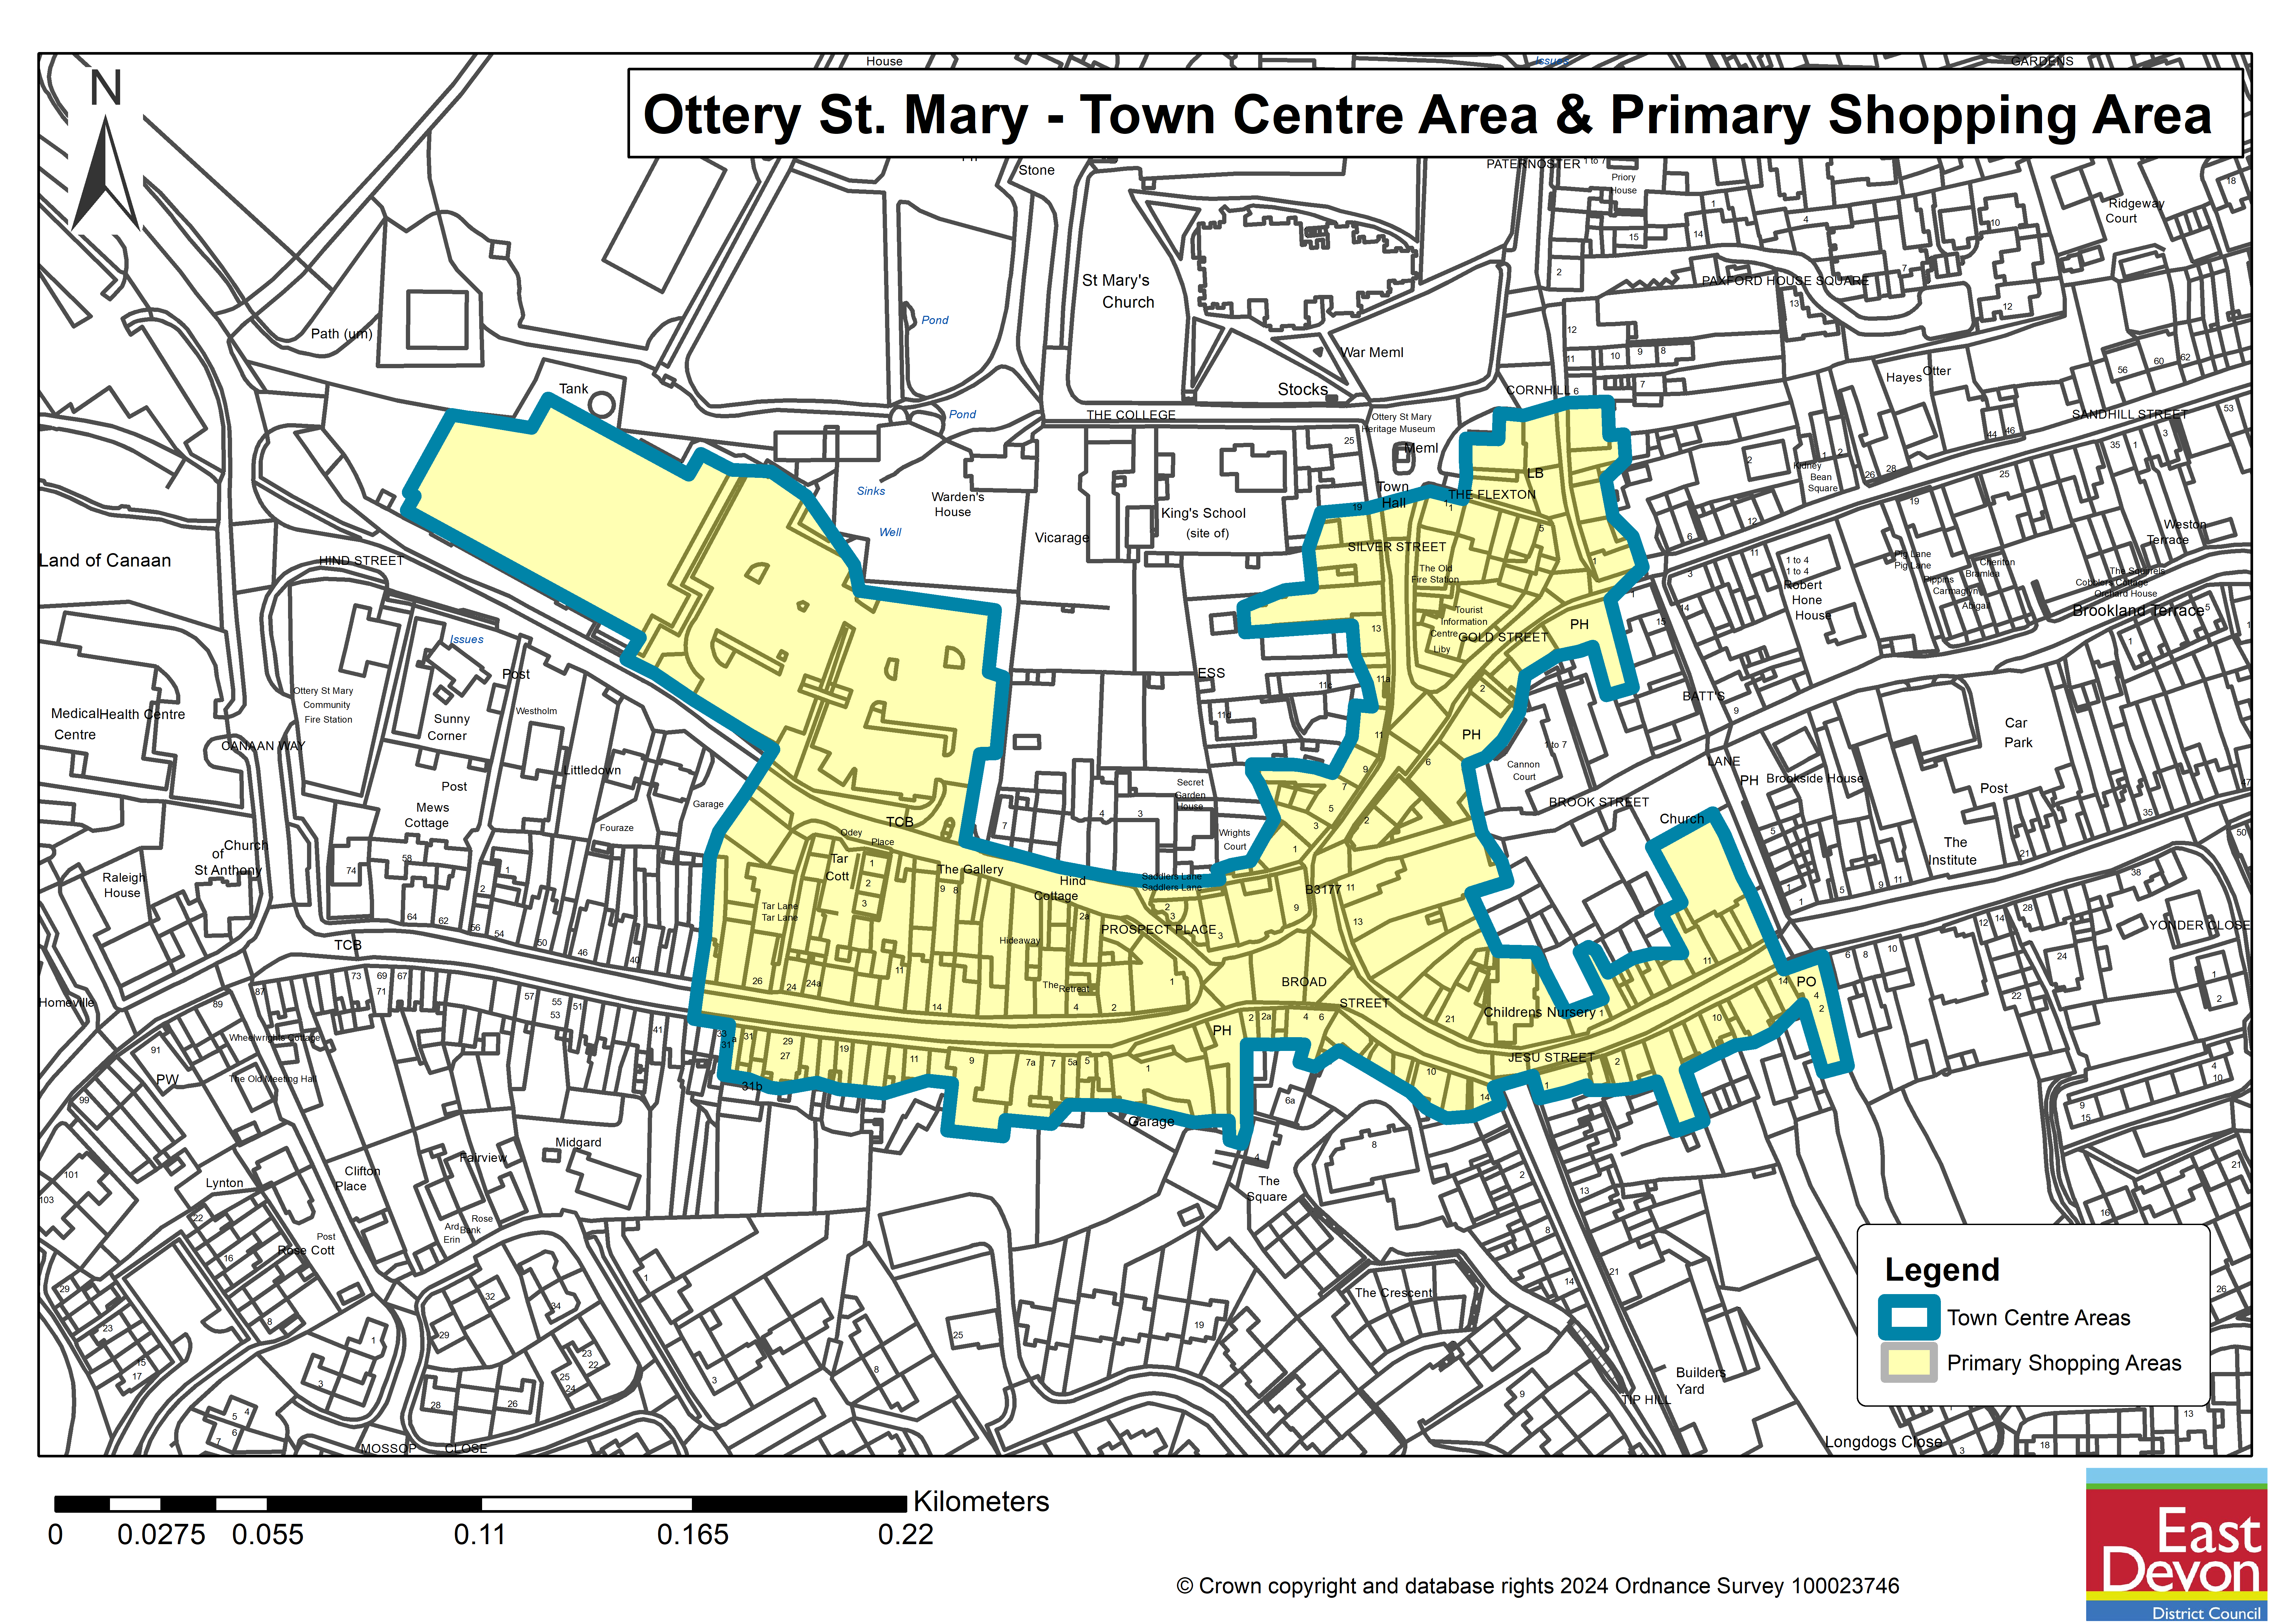 Map of the proposed Ottery St Mary Town Centre Area and Primary Shopping Area